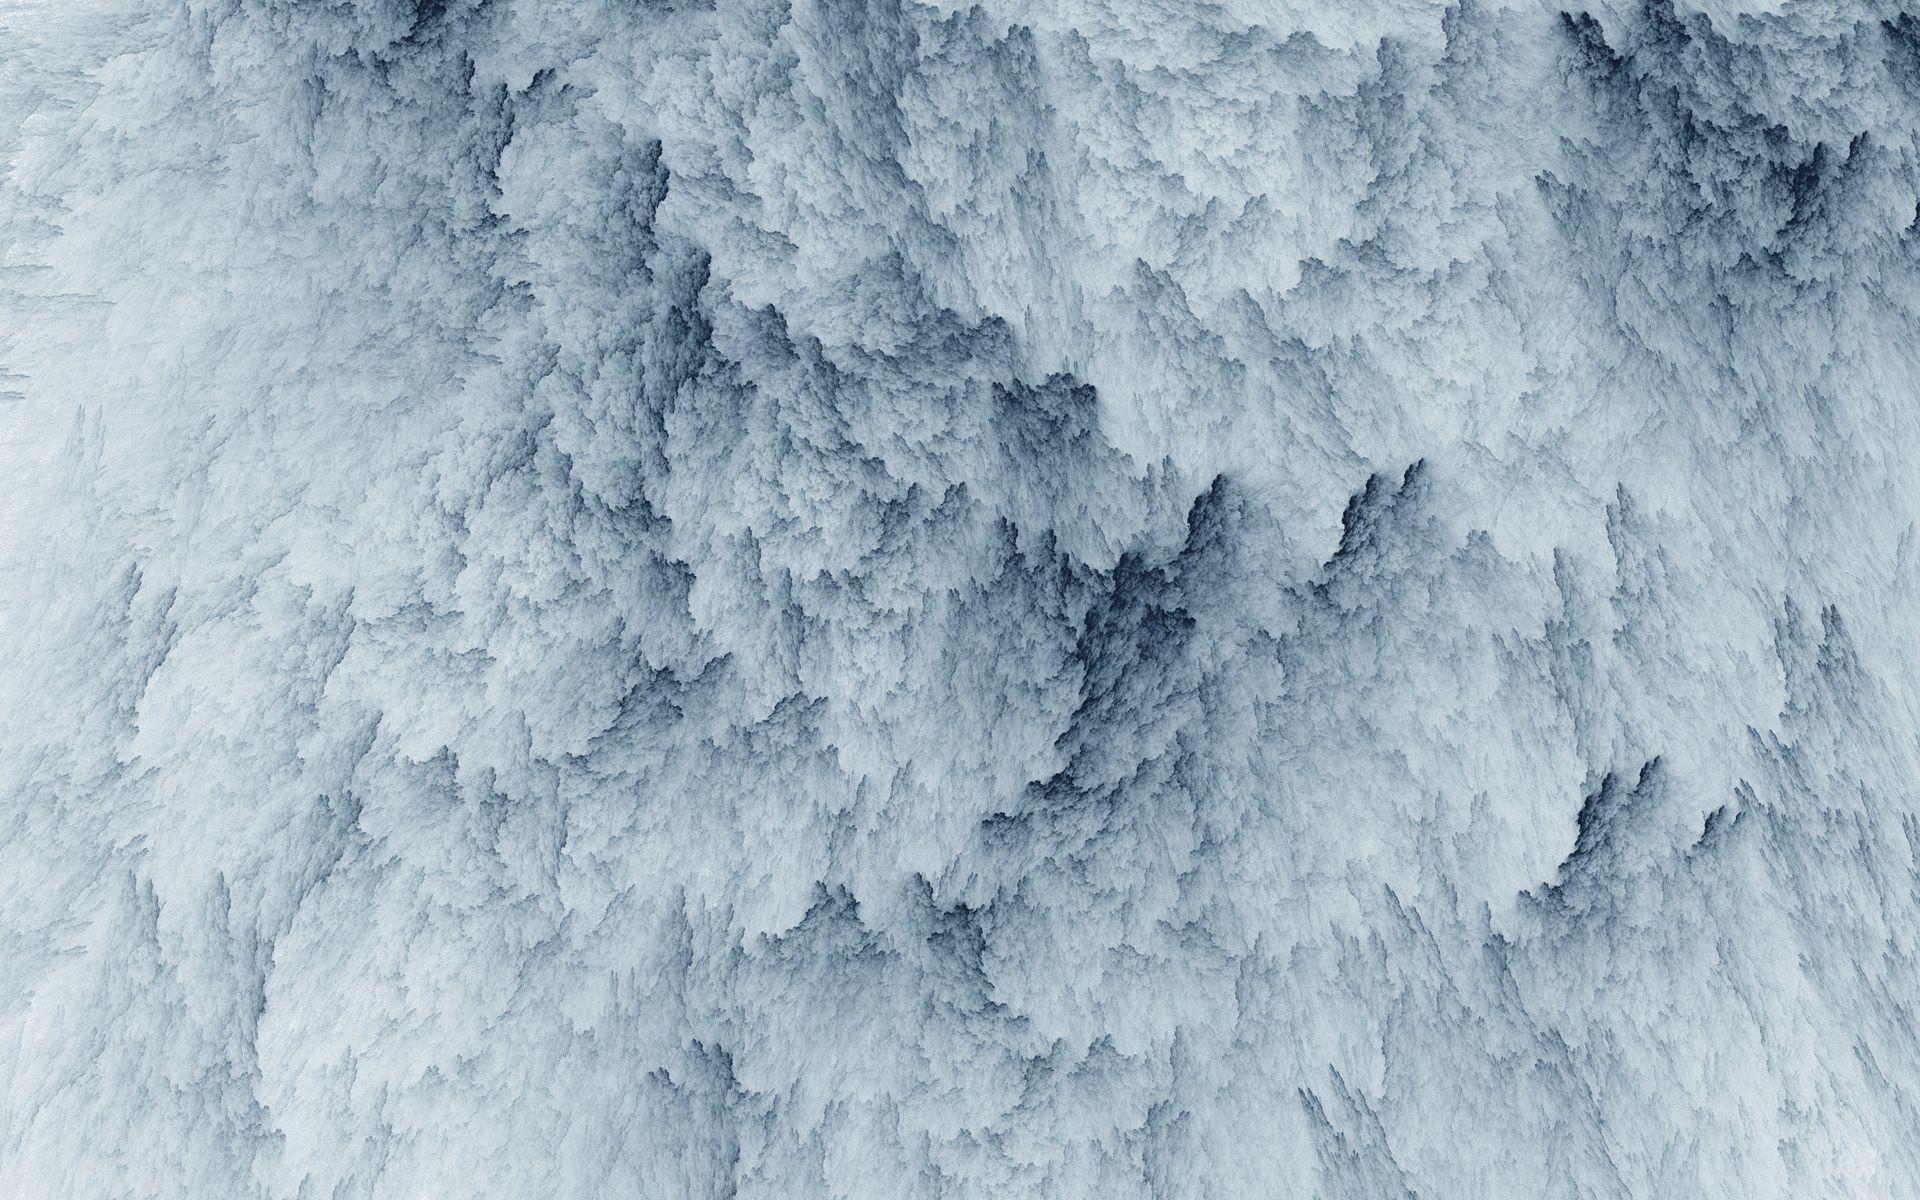 Snow Avalanche Wallpaper High Quality